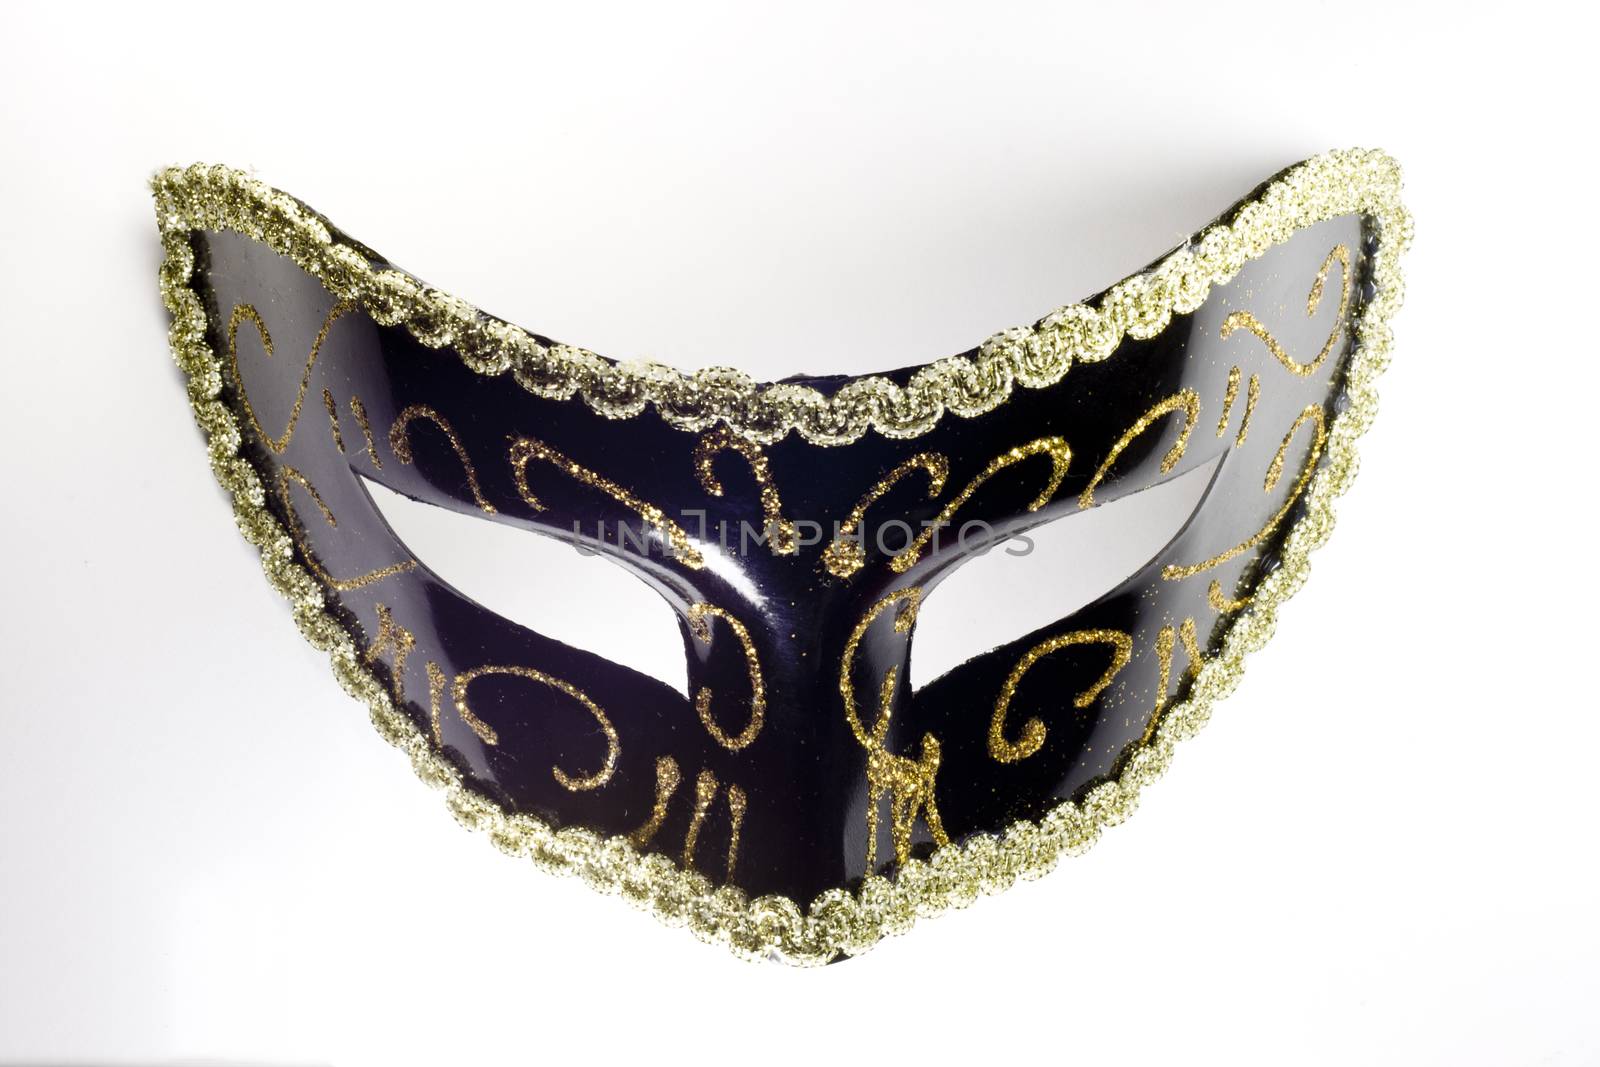 fancy mask by audfriday13